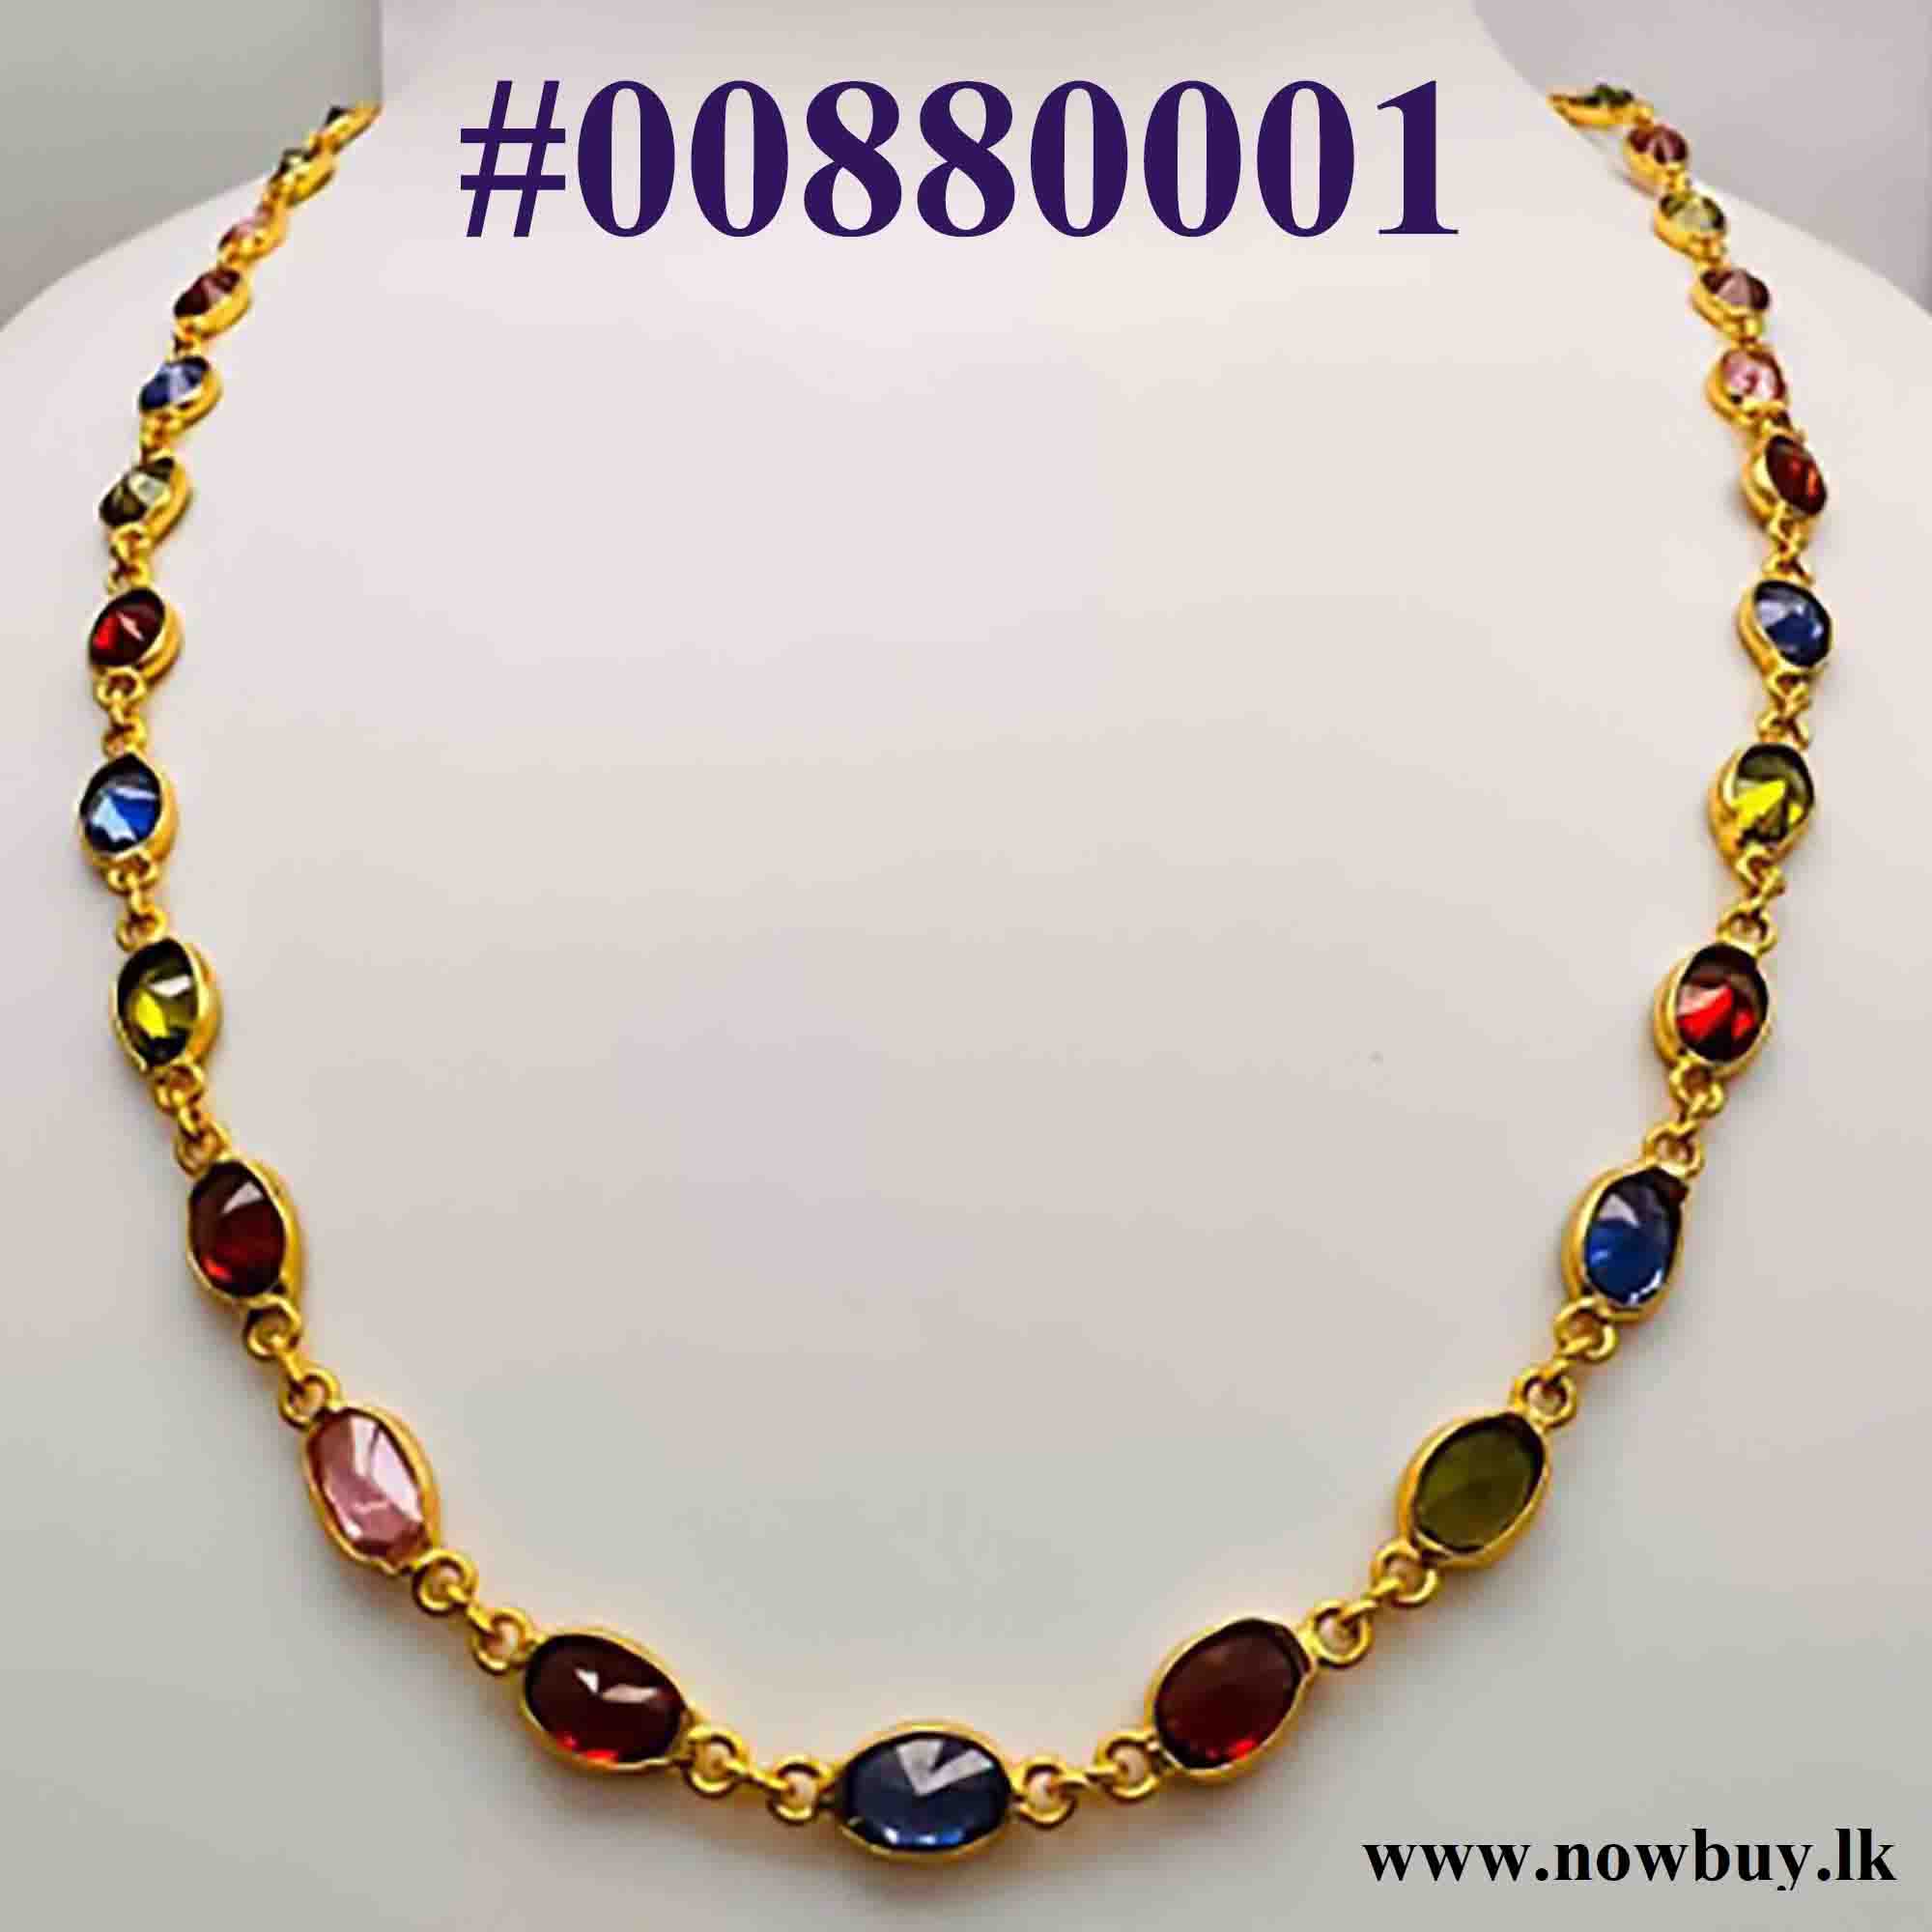 Gold plated Ladies 18/24 Inch Chain With Multi Colored Oval Stone_#088 Necklaces NowBuy.lk 2